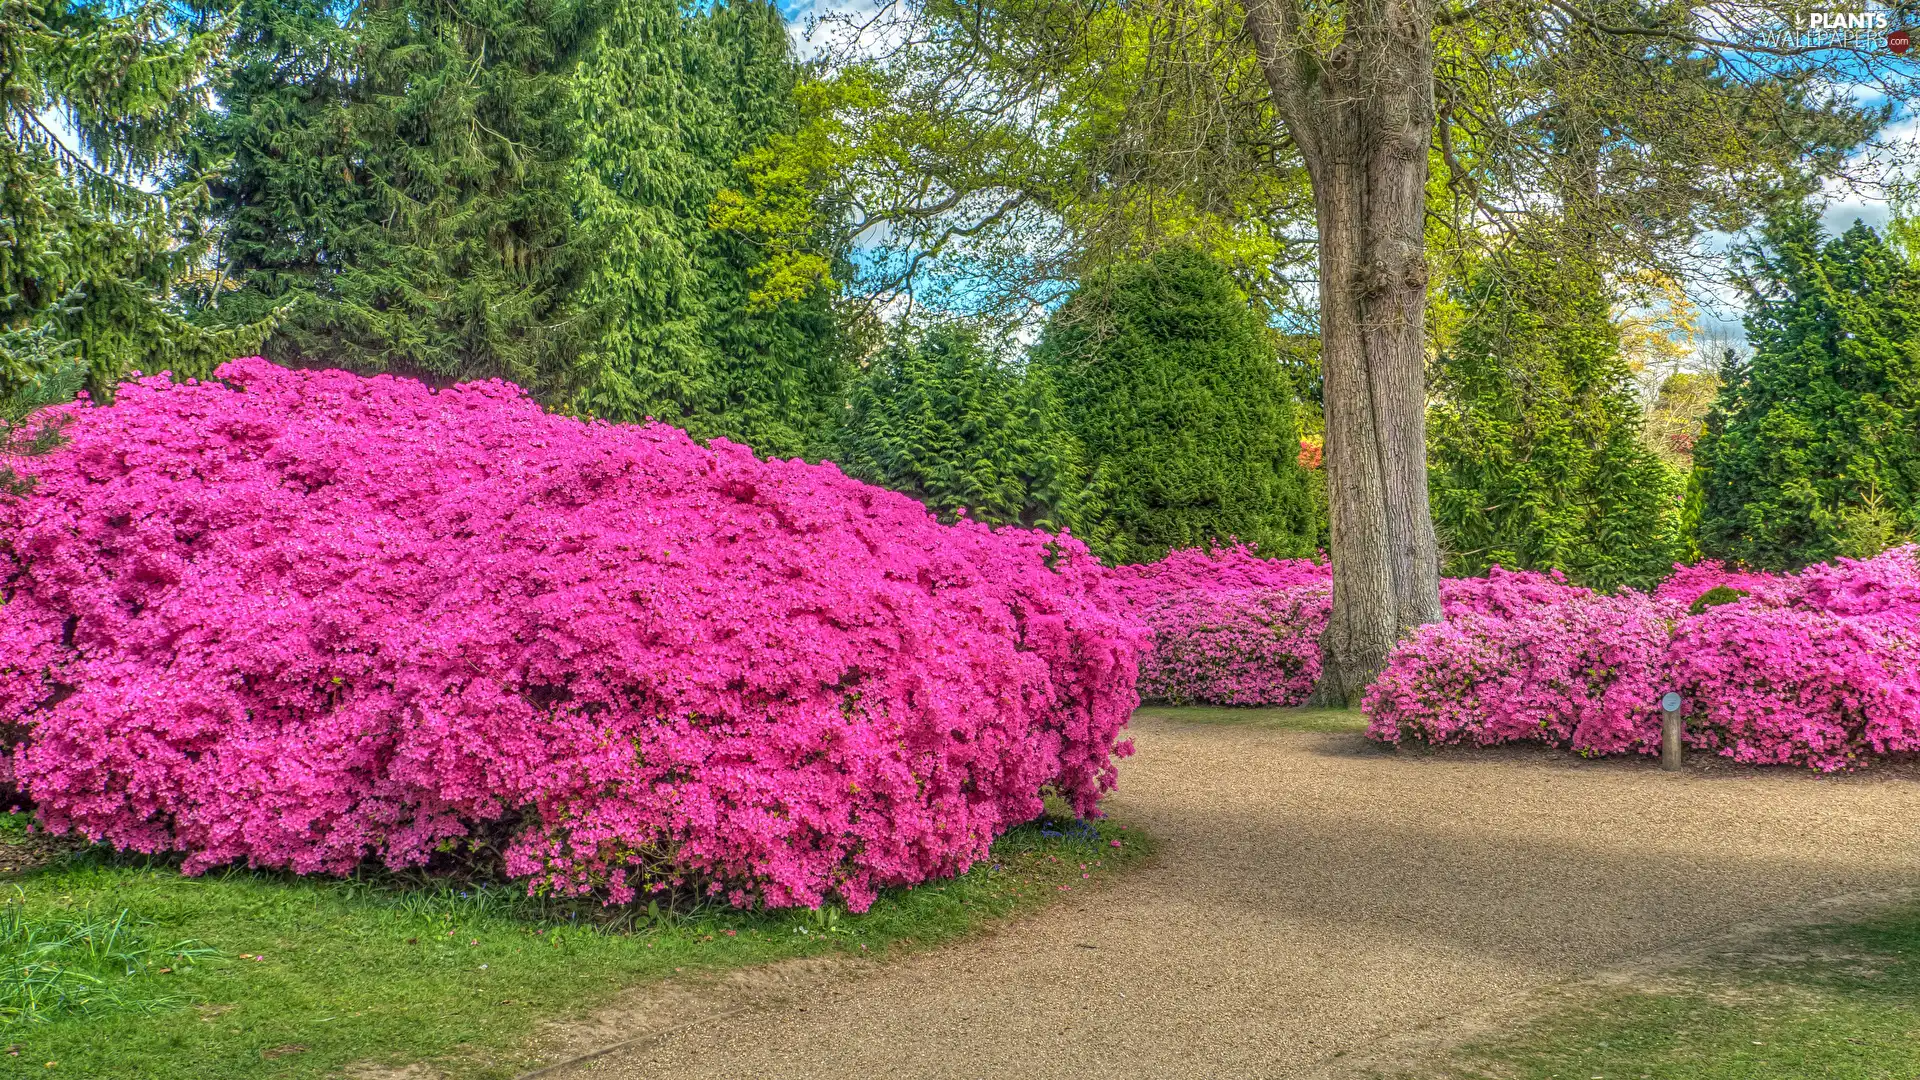 trees, Park, Bush, lane, viewes, Rhododendrons